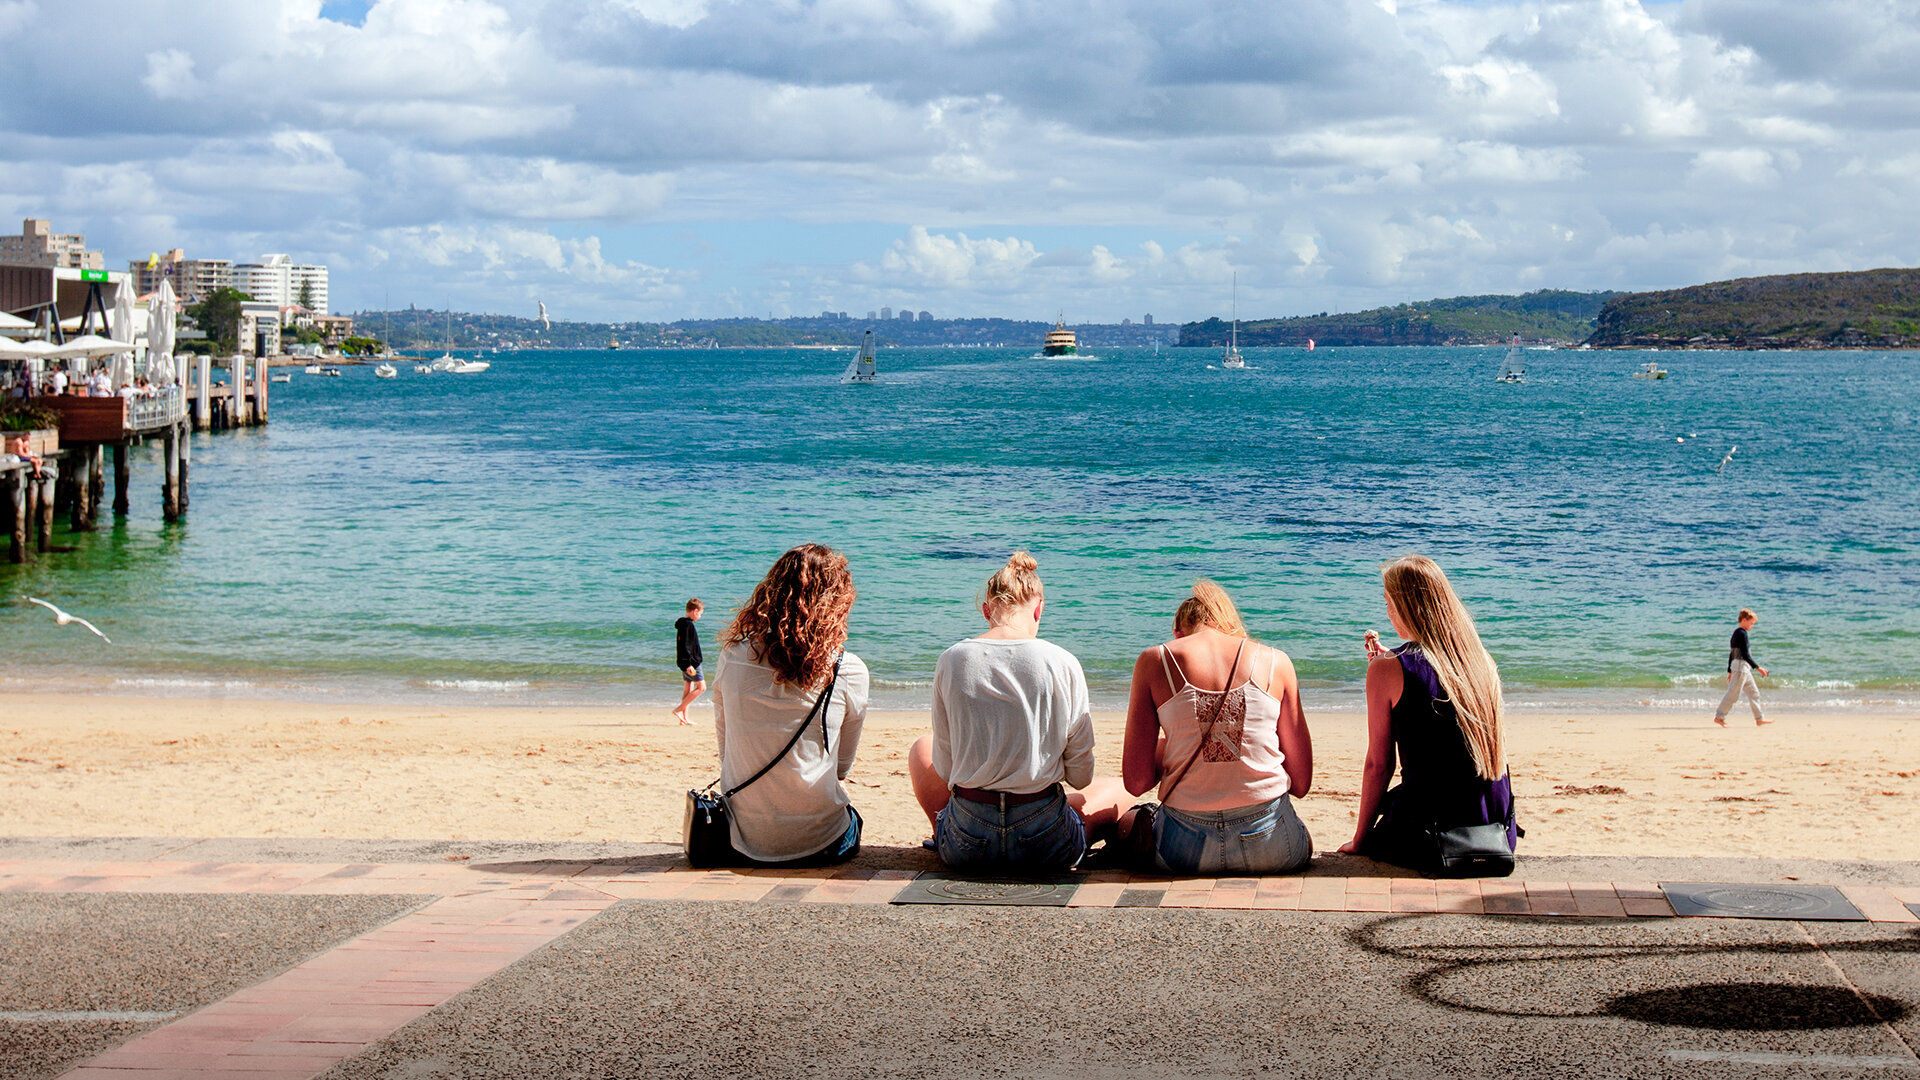 Friends at Manly Cove, Sydney, Australia.